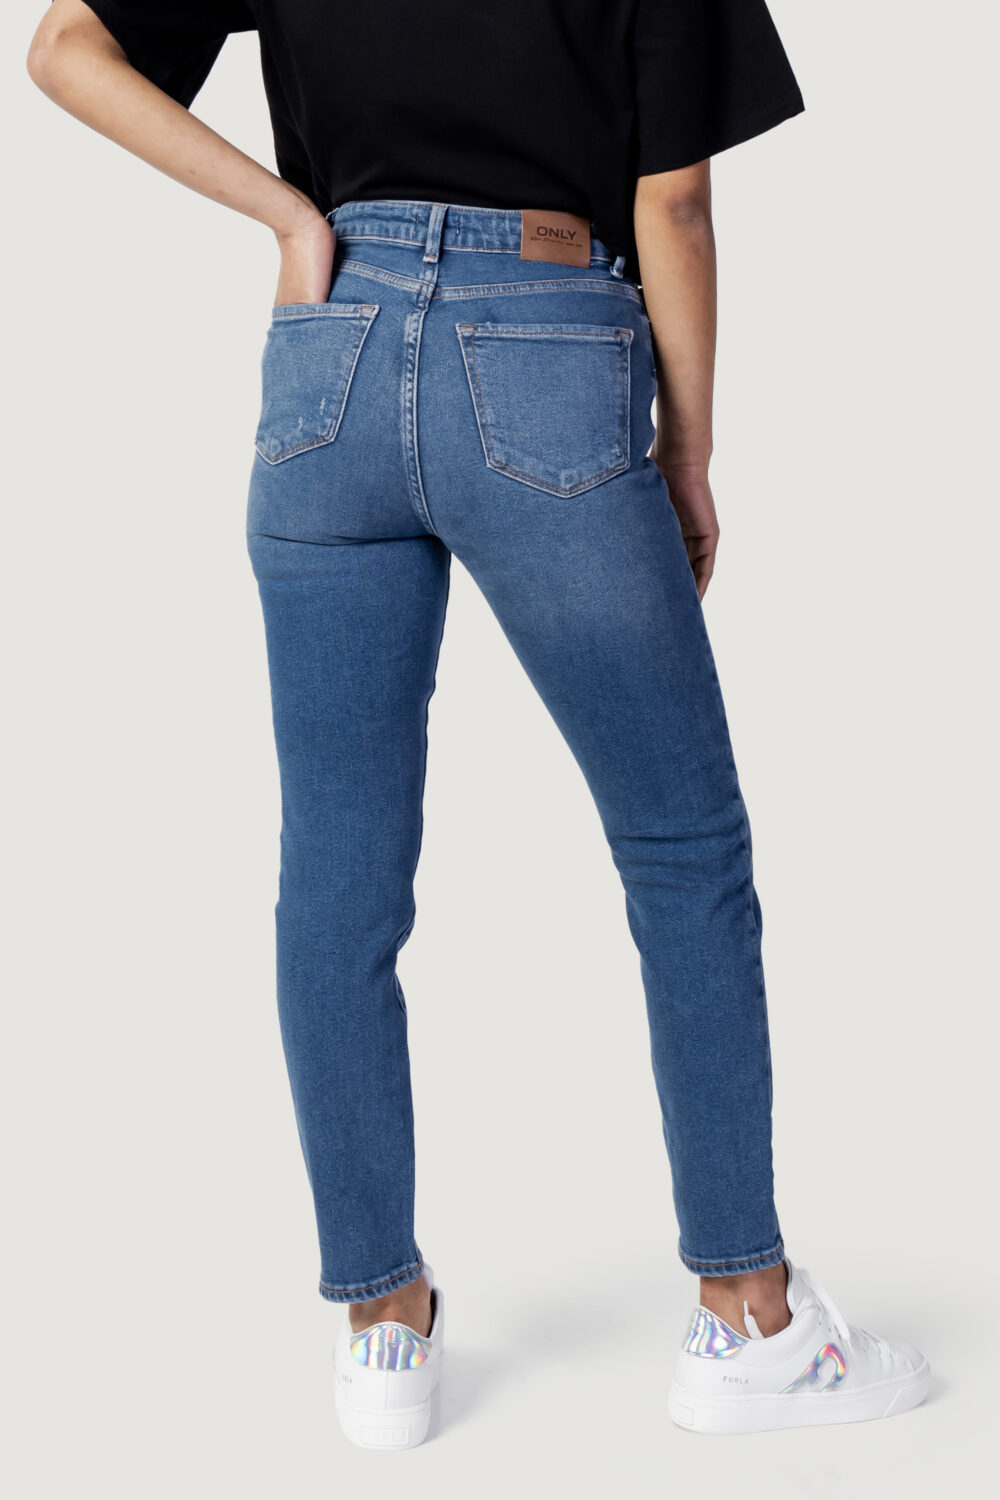 Jeans skinny Only onlemily stretch hw s a cro718 noos Denim - Foto 3